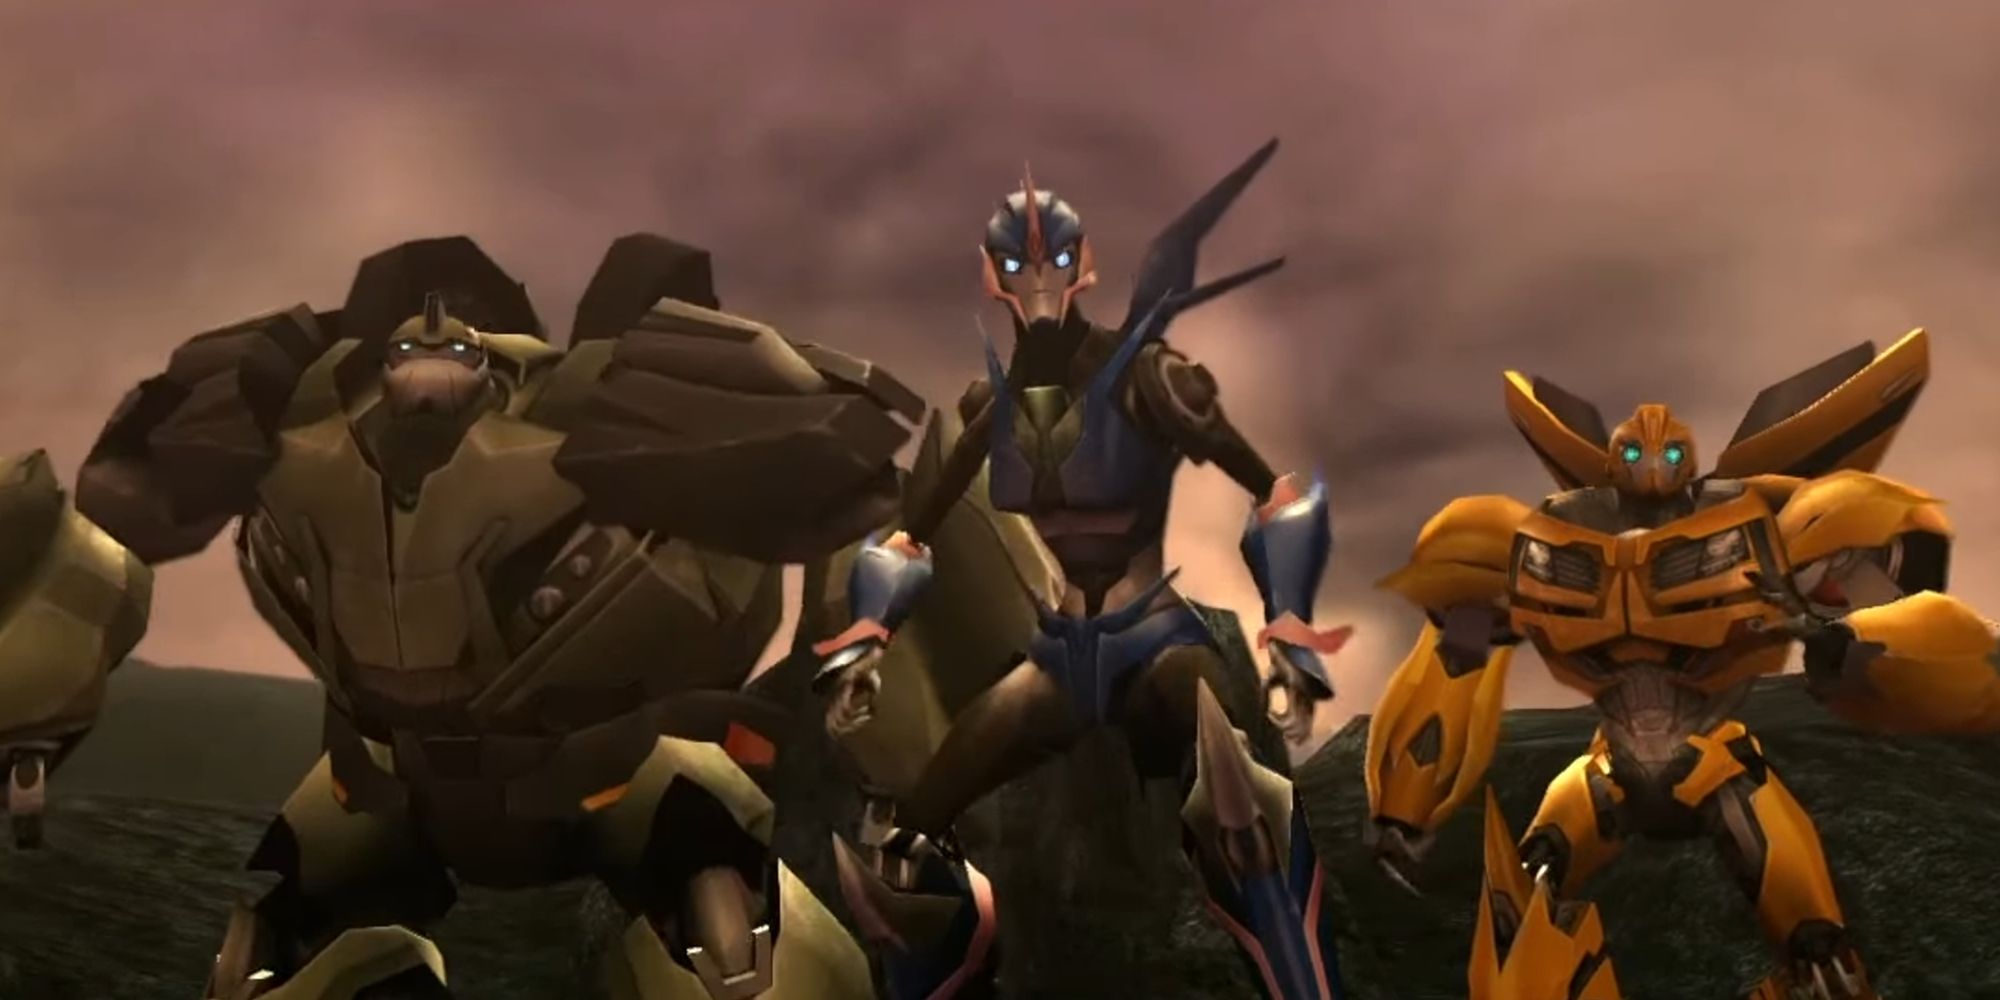 Arcee, Bumblebee, and Bulkhead together in Transformers Prime The Game